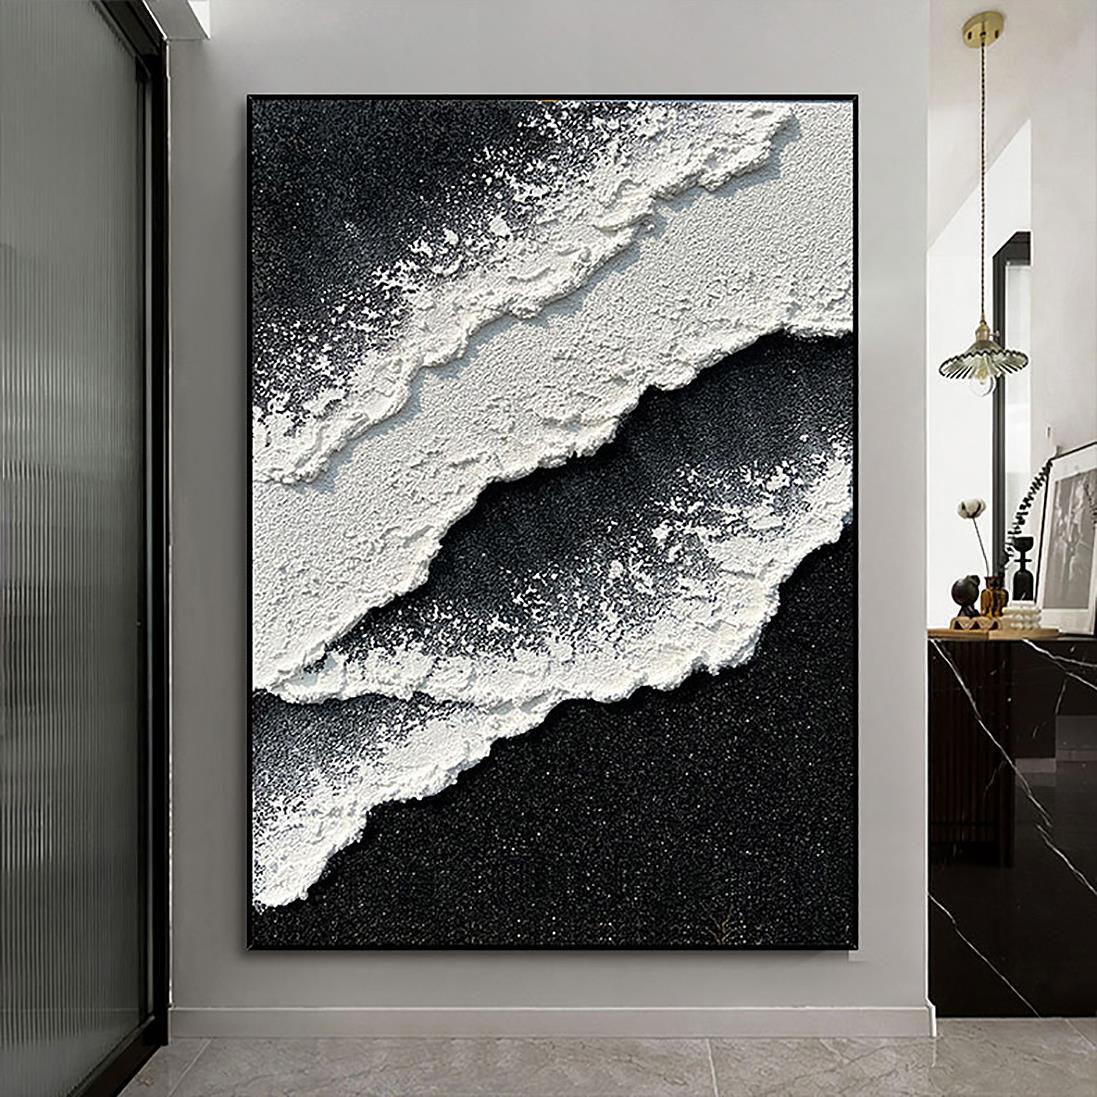 Beach wave abstract 08 wall art minimalism texture Oil Paintings